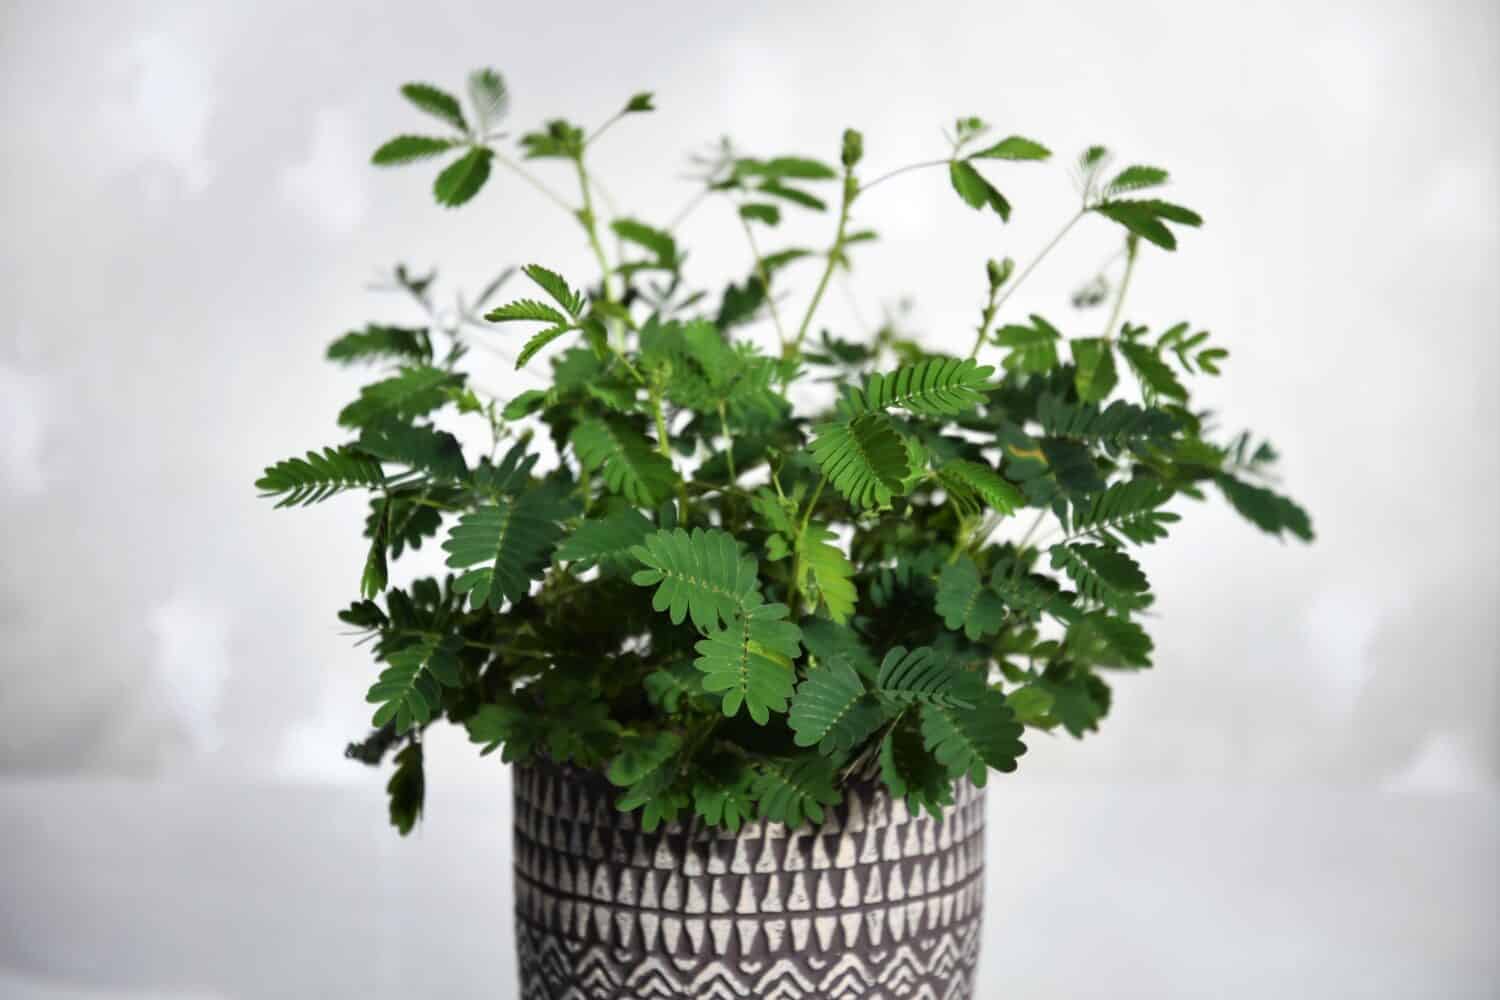 Mimosa pudica houseplant, aka sensitive plant, sleepy plant, action plant, touch-me-not, and shameplant. Isolated against a white background, in a purple decorative pot. Shallow depth of field.